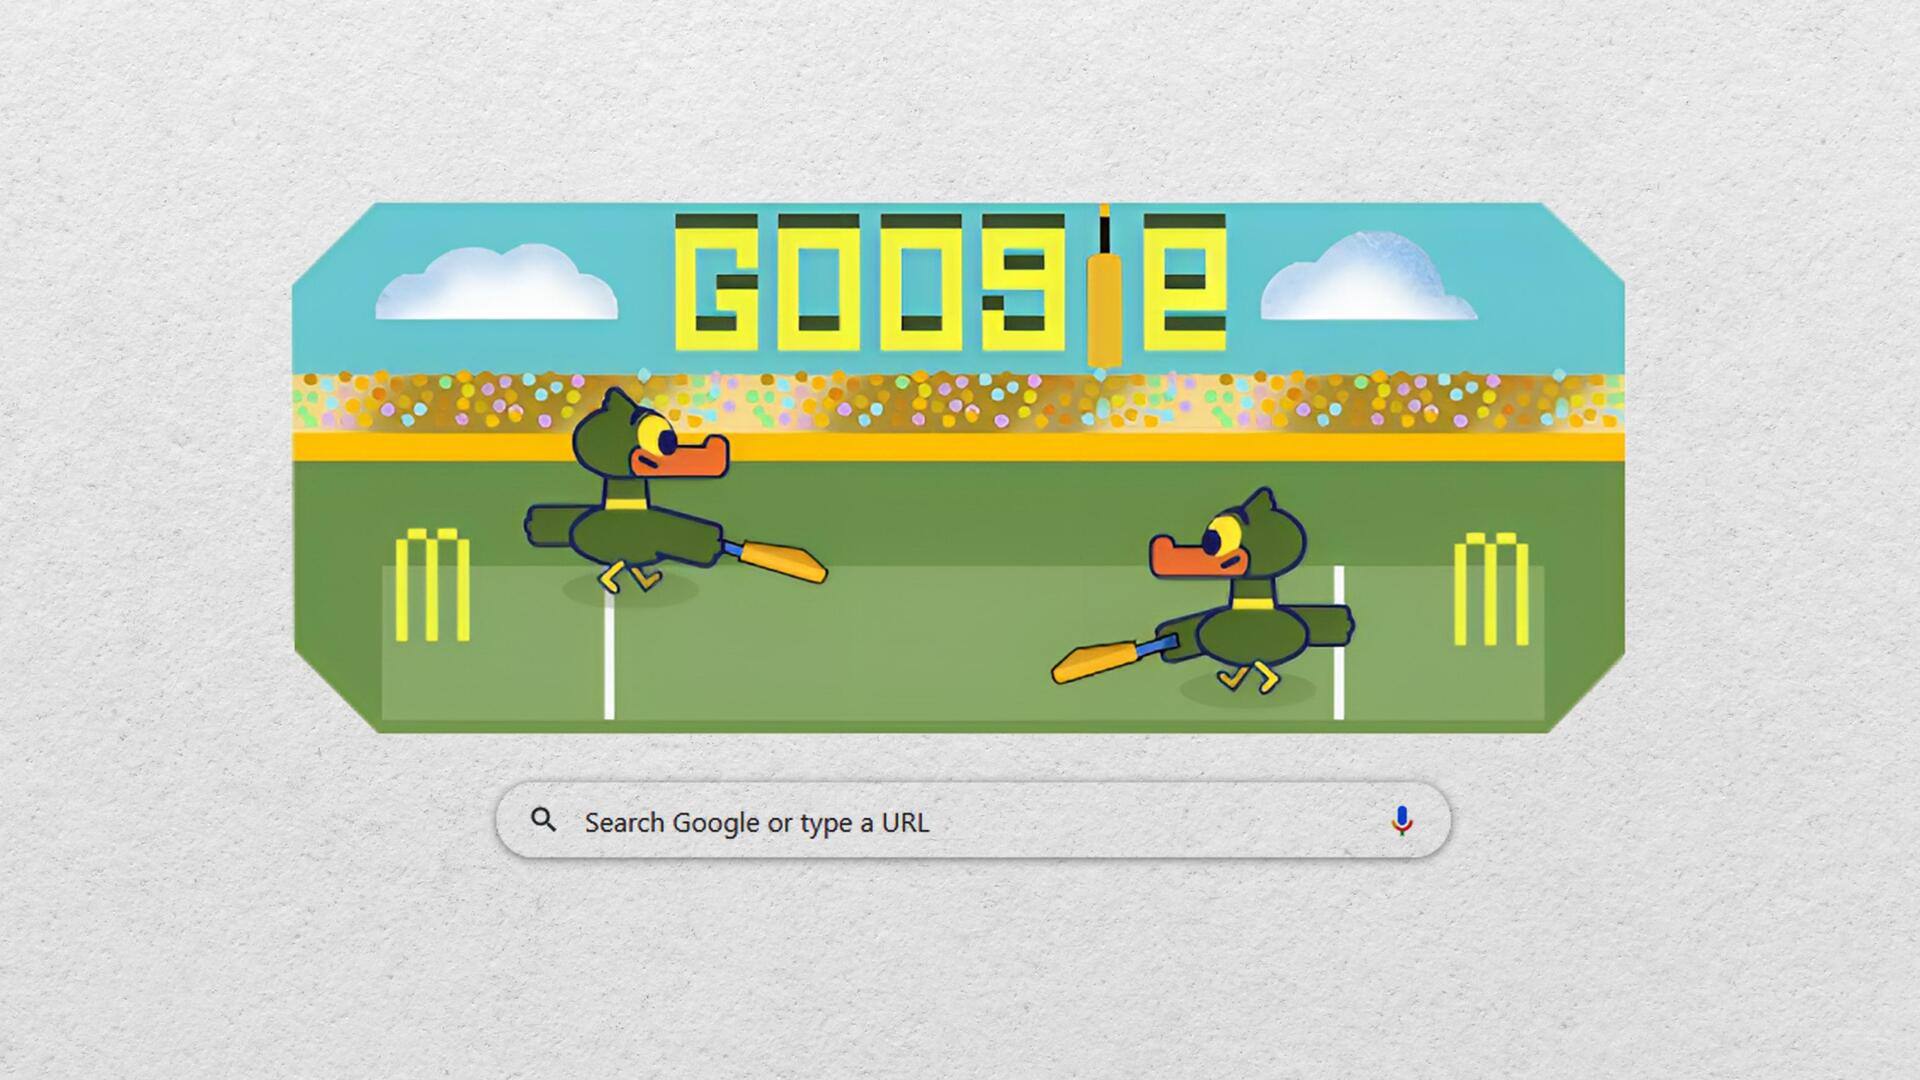 Google Doodle celebrates the opening of ICC Men's World Cup